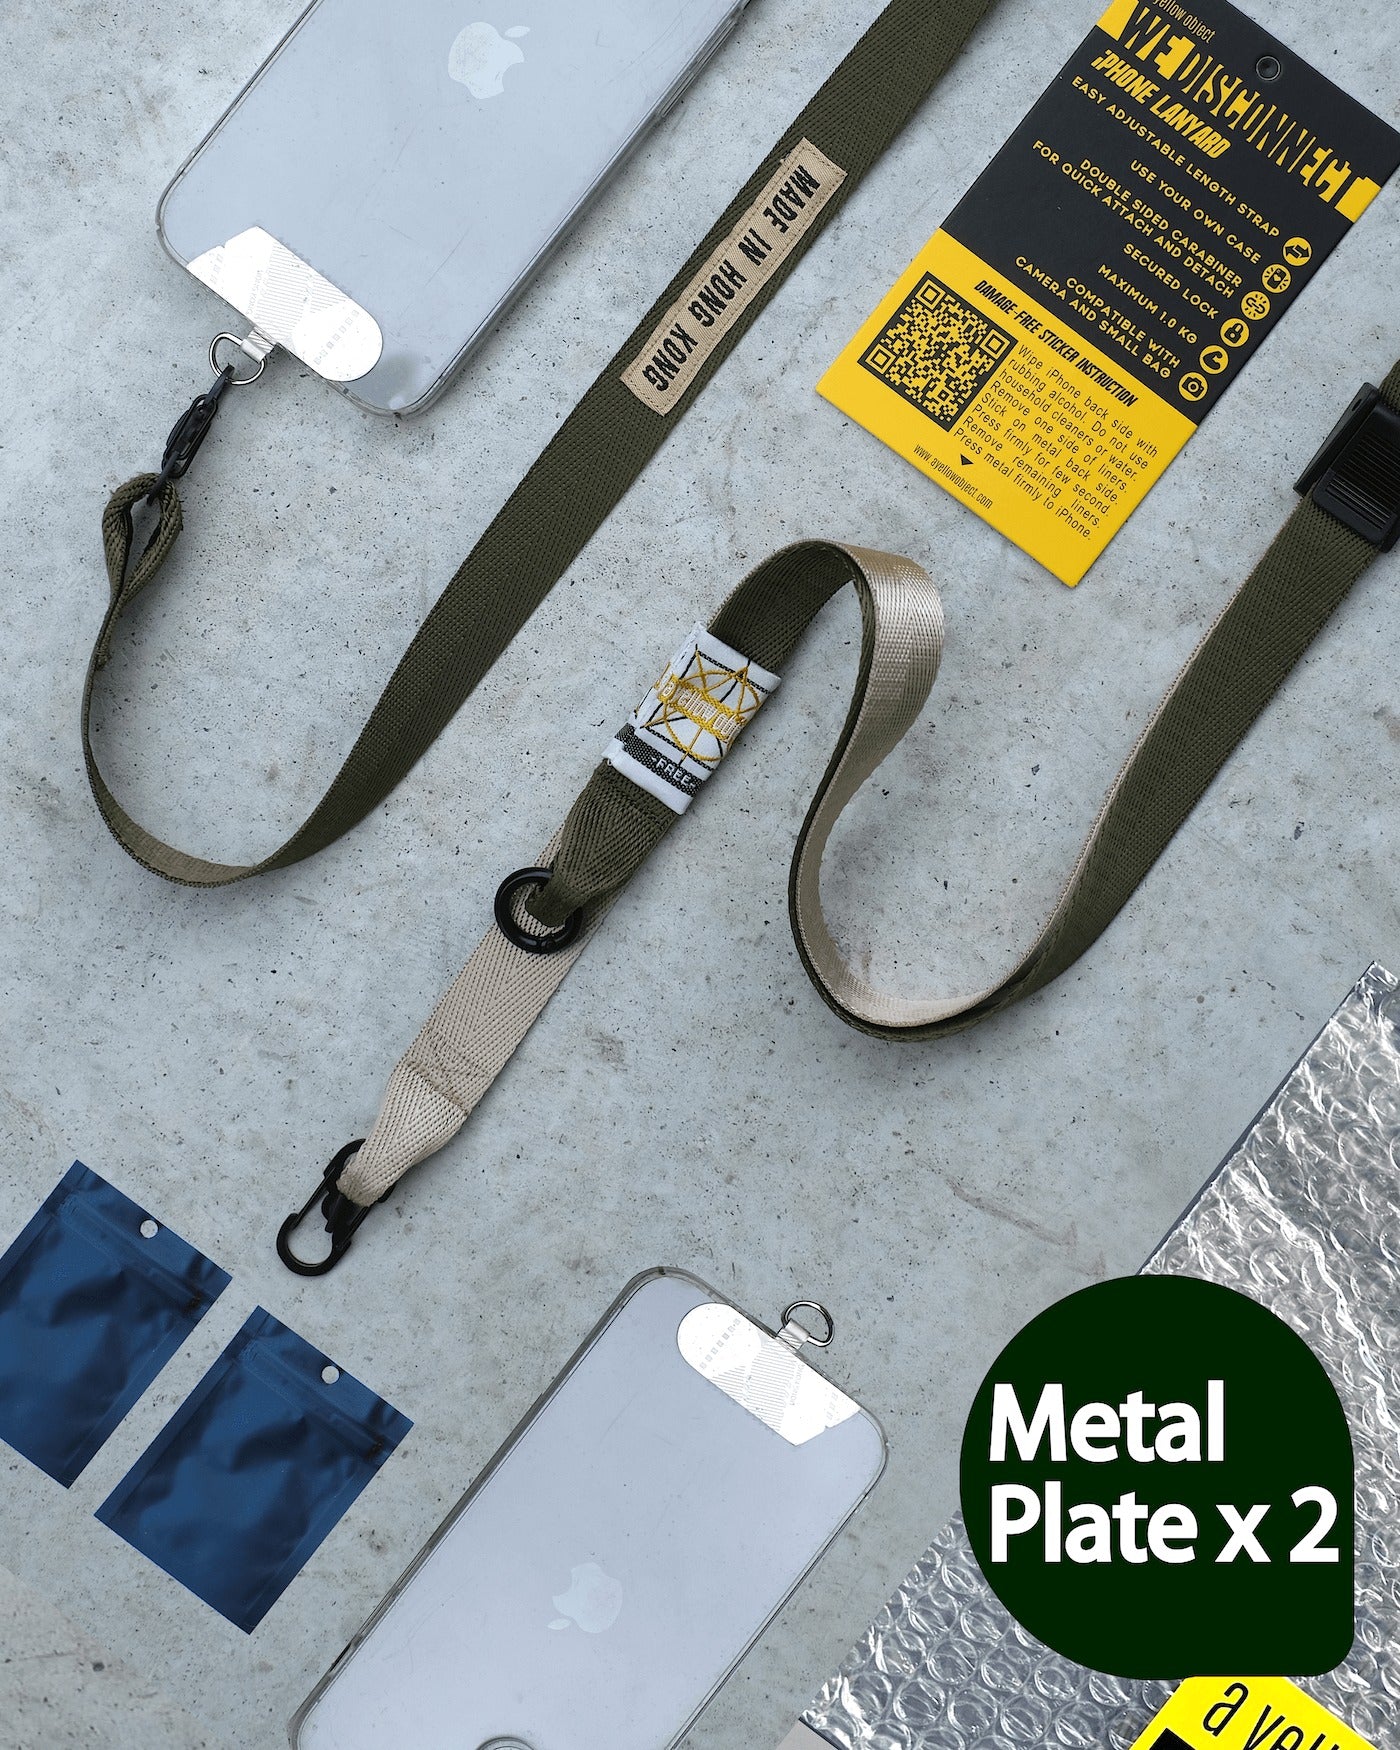 We Disconnect 2.0 Phone Lanyard (Army) - Metal Plate x 2 - a yellow object